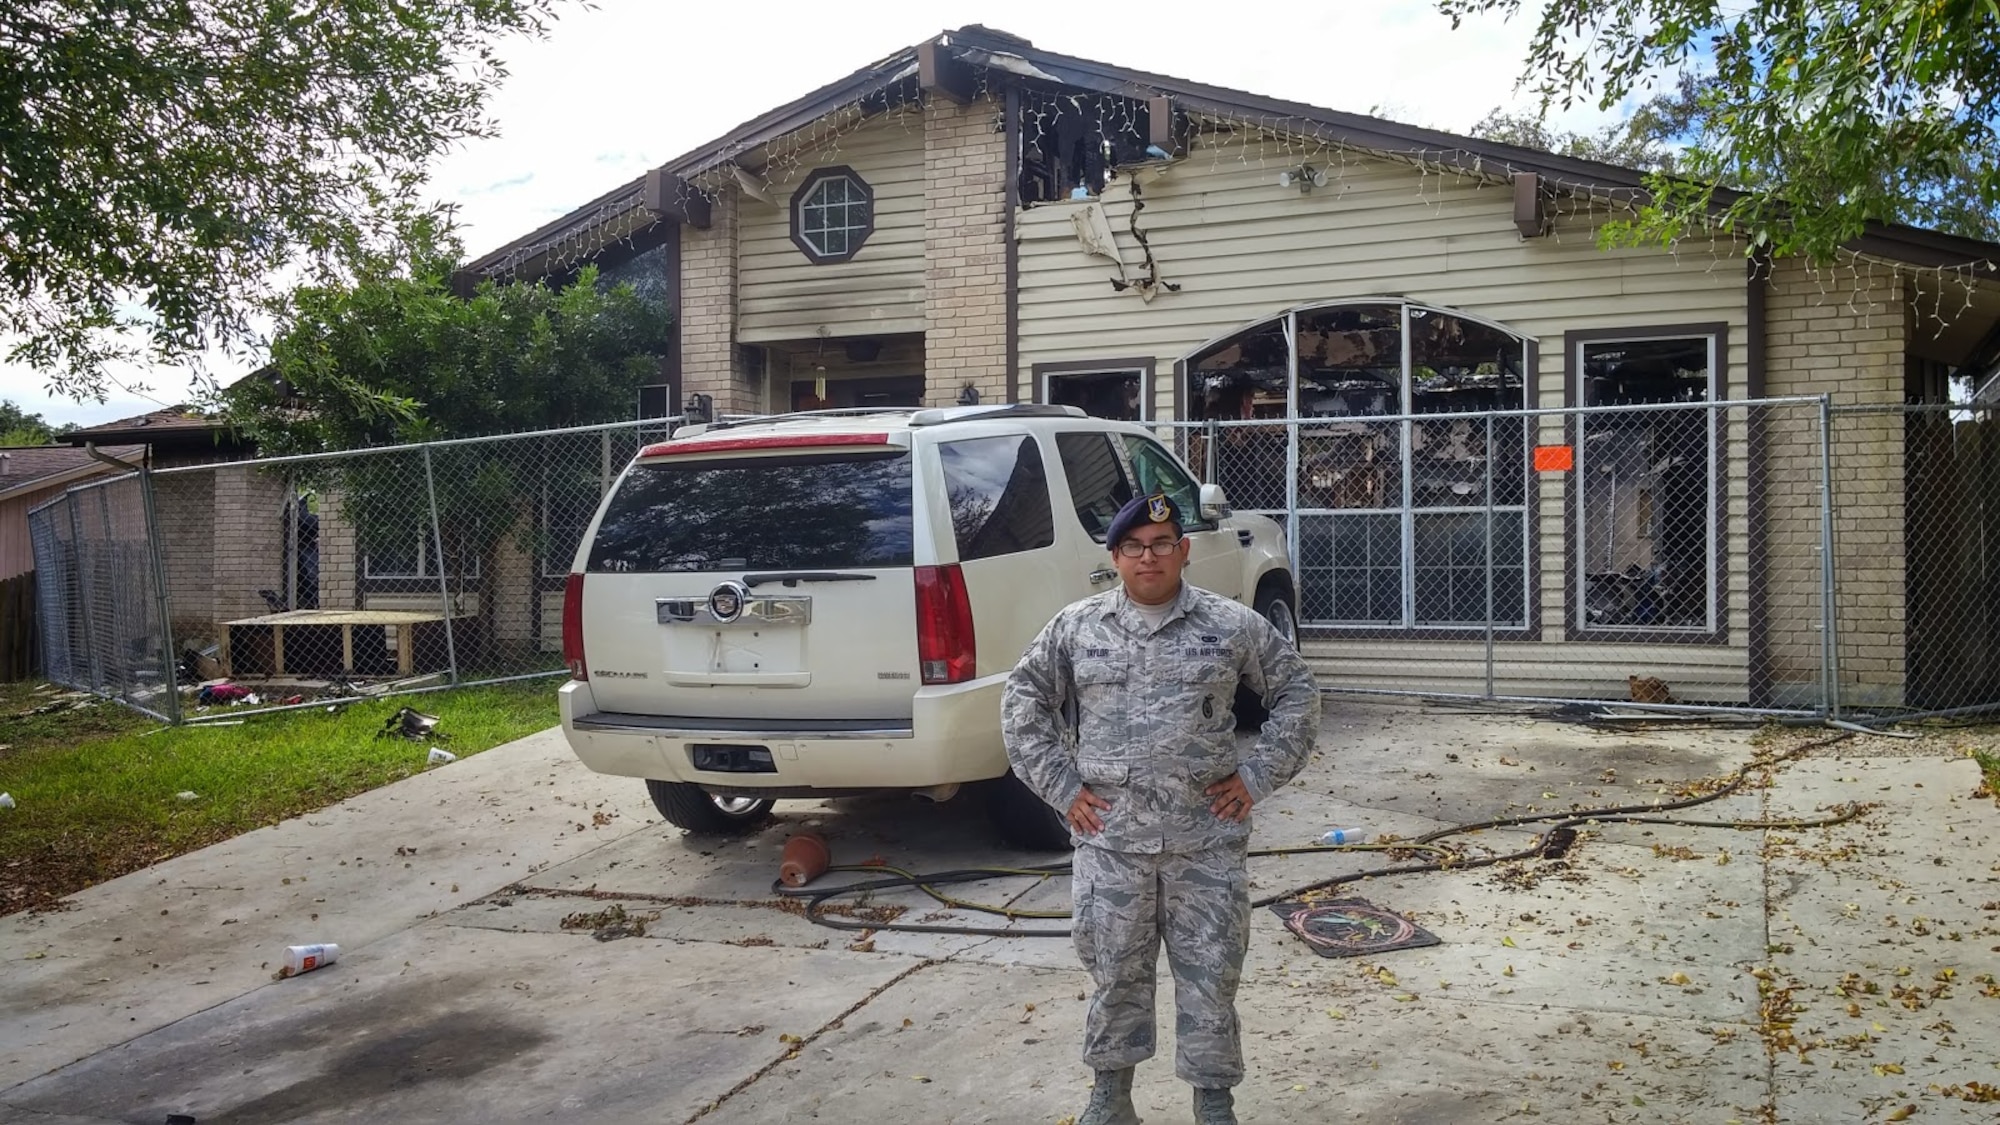 Senior Airman Christopher Taylor, 802nd Security Forces Squadron pass and processing, stands outside the remains of the burnt building in San Antonio. Taylor saved a disabled man from a fire, Nov. 3. The man was admitted to the San Antonio Military Medical Complex where he remains for treatment due to minor burns on the left side of his body and severe smoke inhalation. (U.S. Air Force photo by Senior Airman Lynsie Nichols/released).